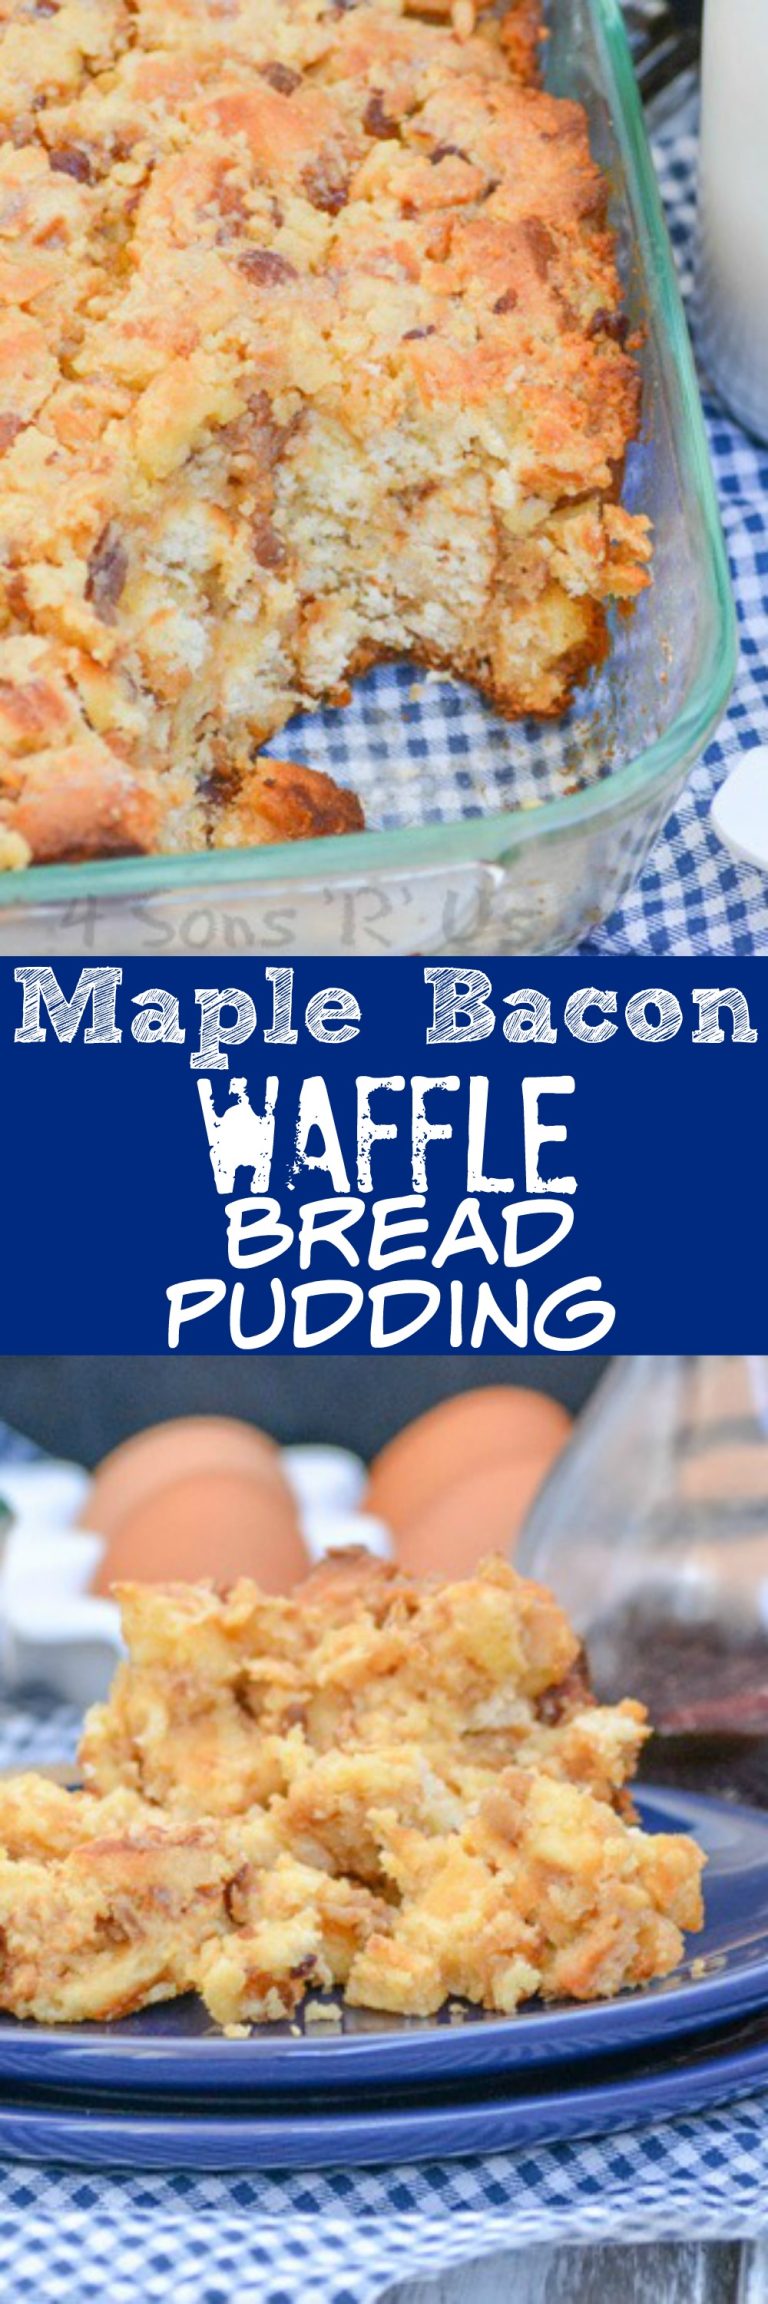 Maple Bacon Waffle Bread Pudding - 4 Sons 'R' Us